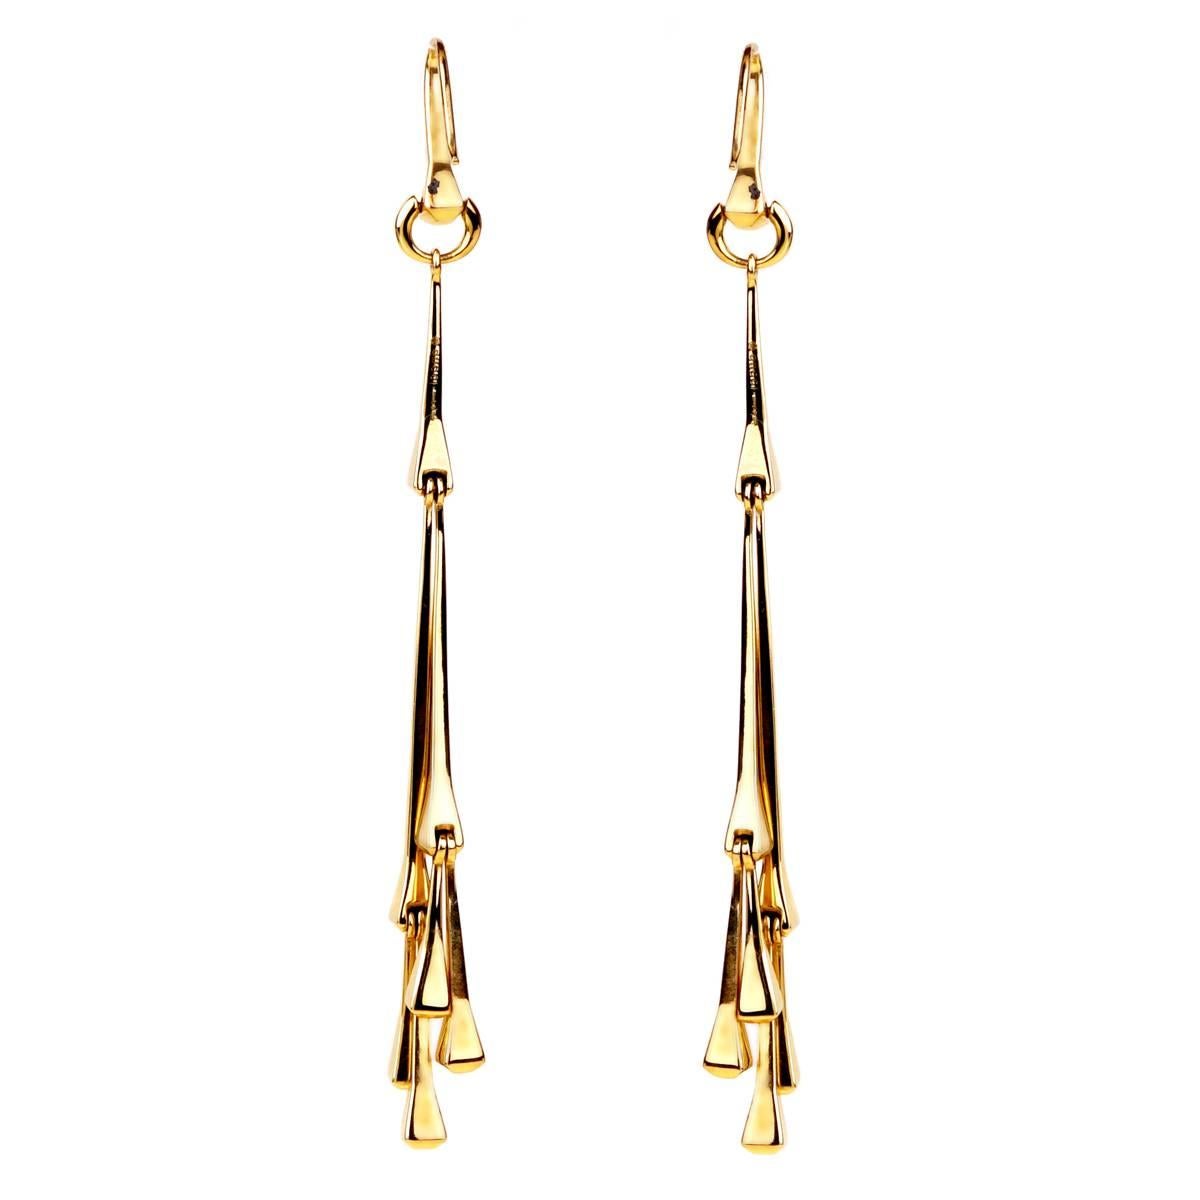 An iconic pair of Gucci Chiodo drop earrings in 18k yellow gold, the earrings measure 3.75